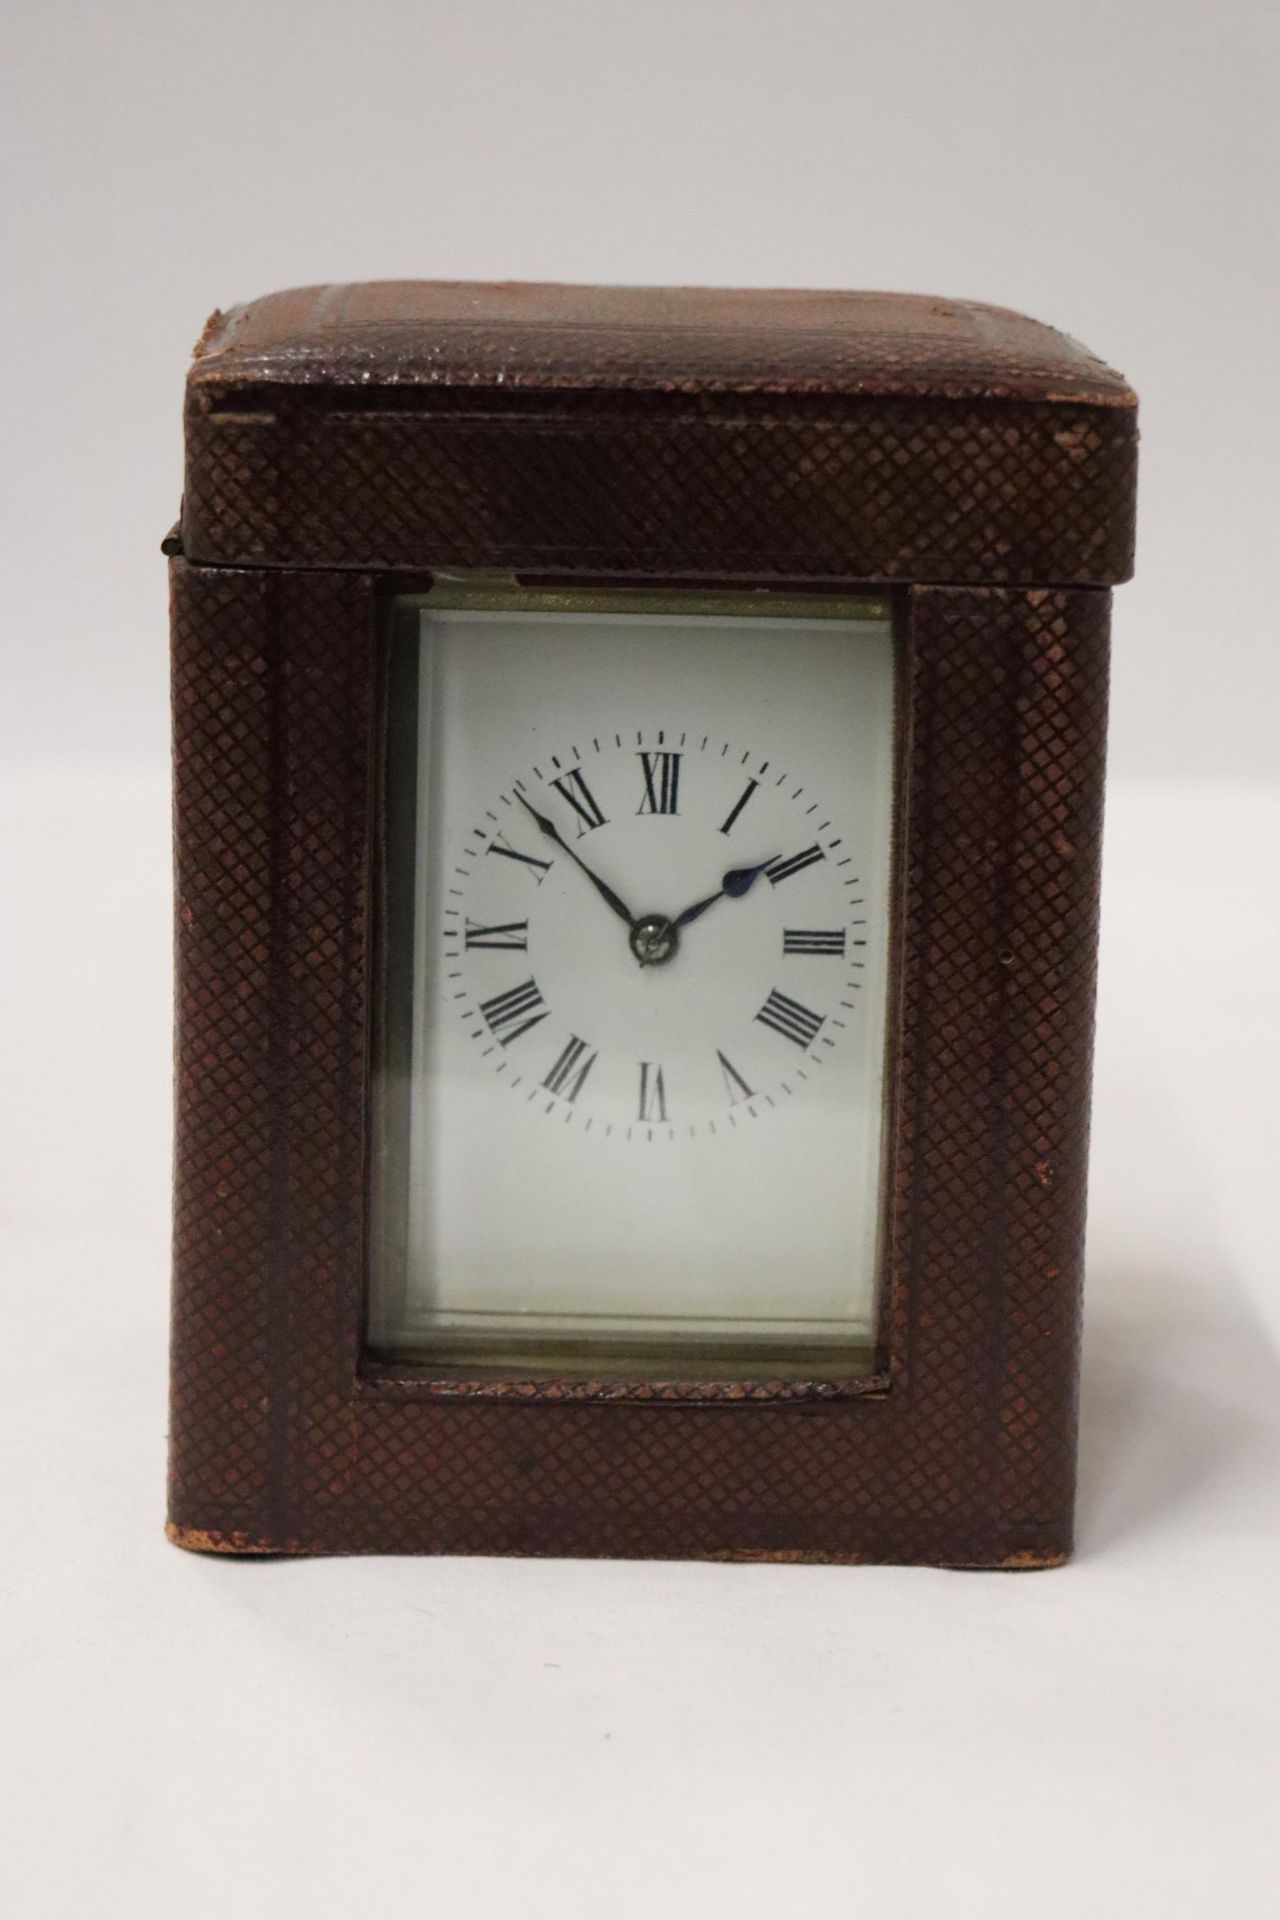 A VINTAGE BRASS ALARM CLOCK WITH GLASS SIDES TO SHOW INNER WORKINGS, IN A LEATHER CASE